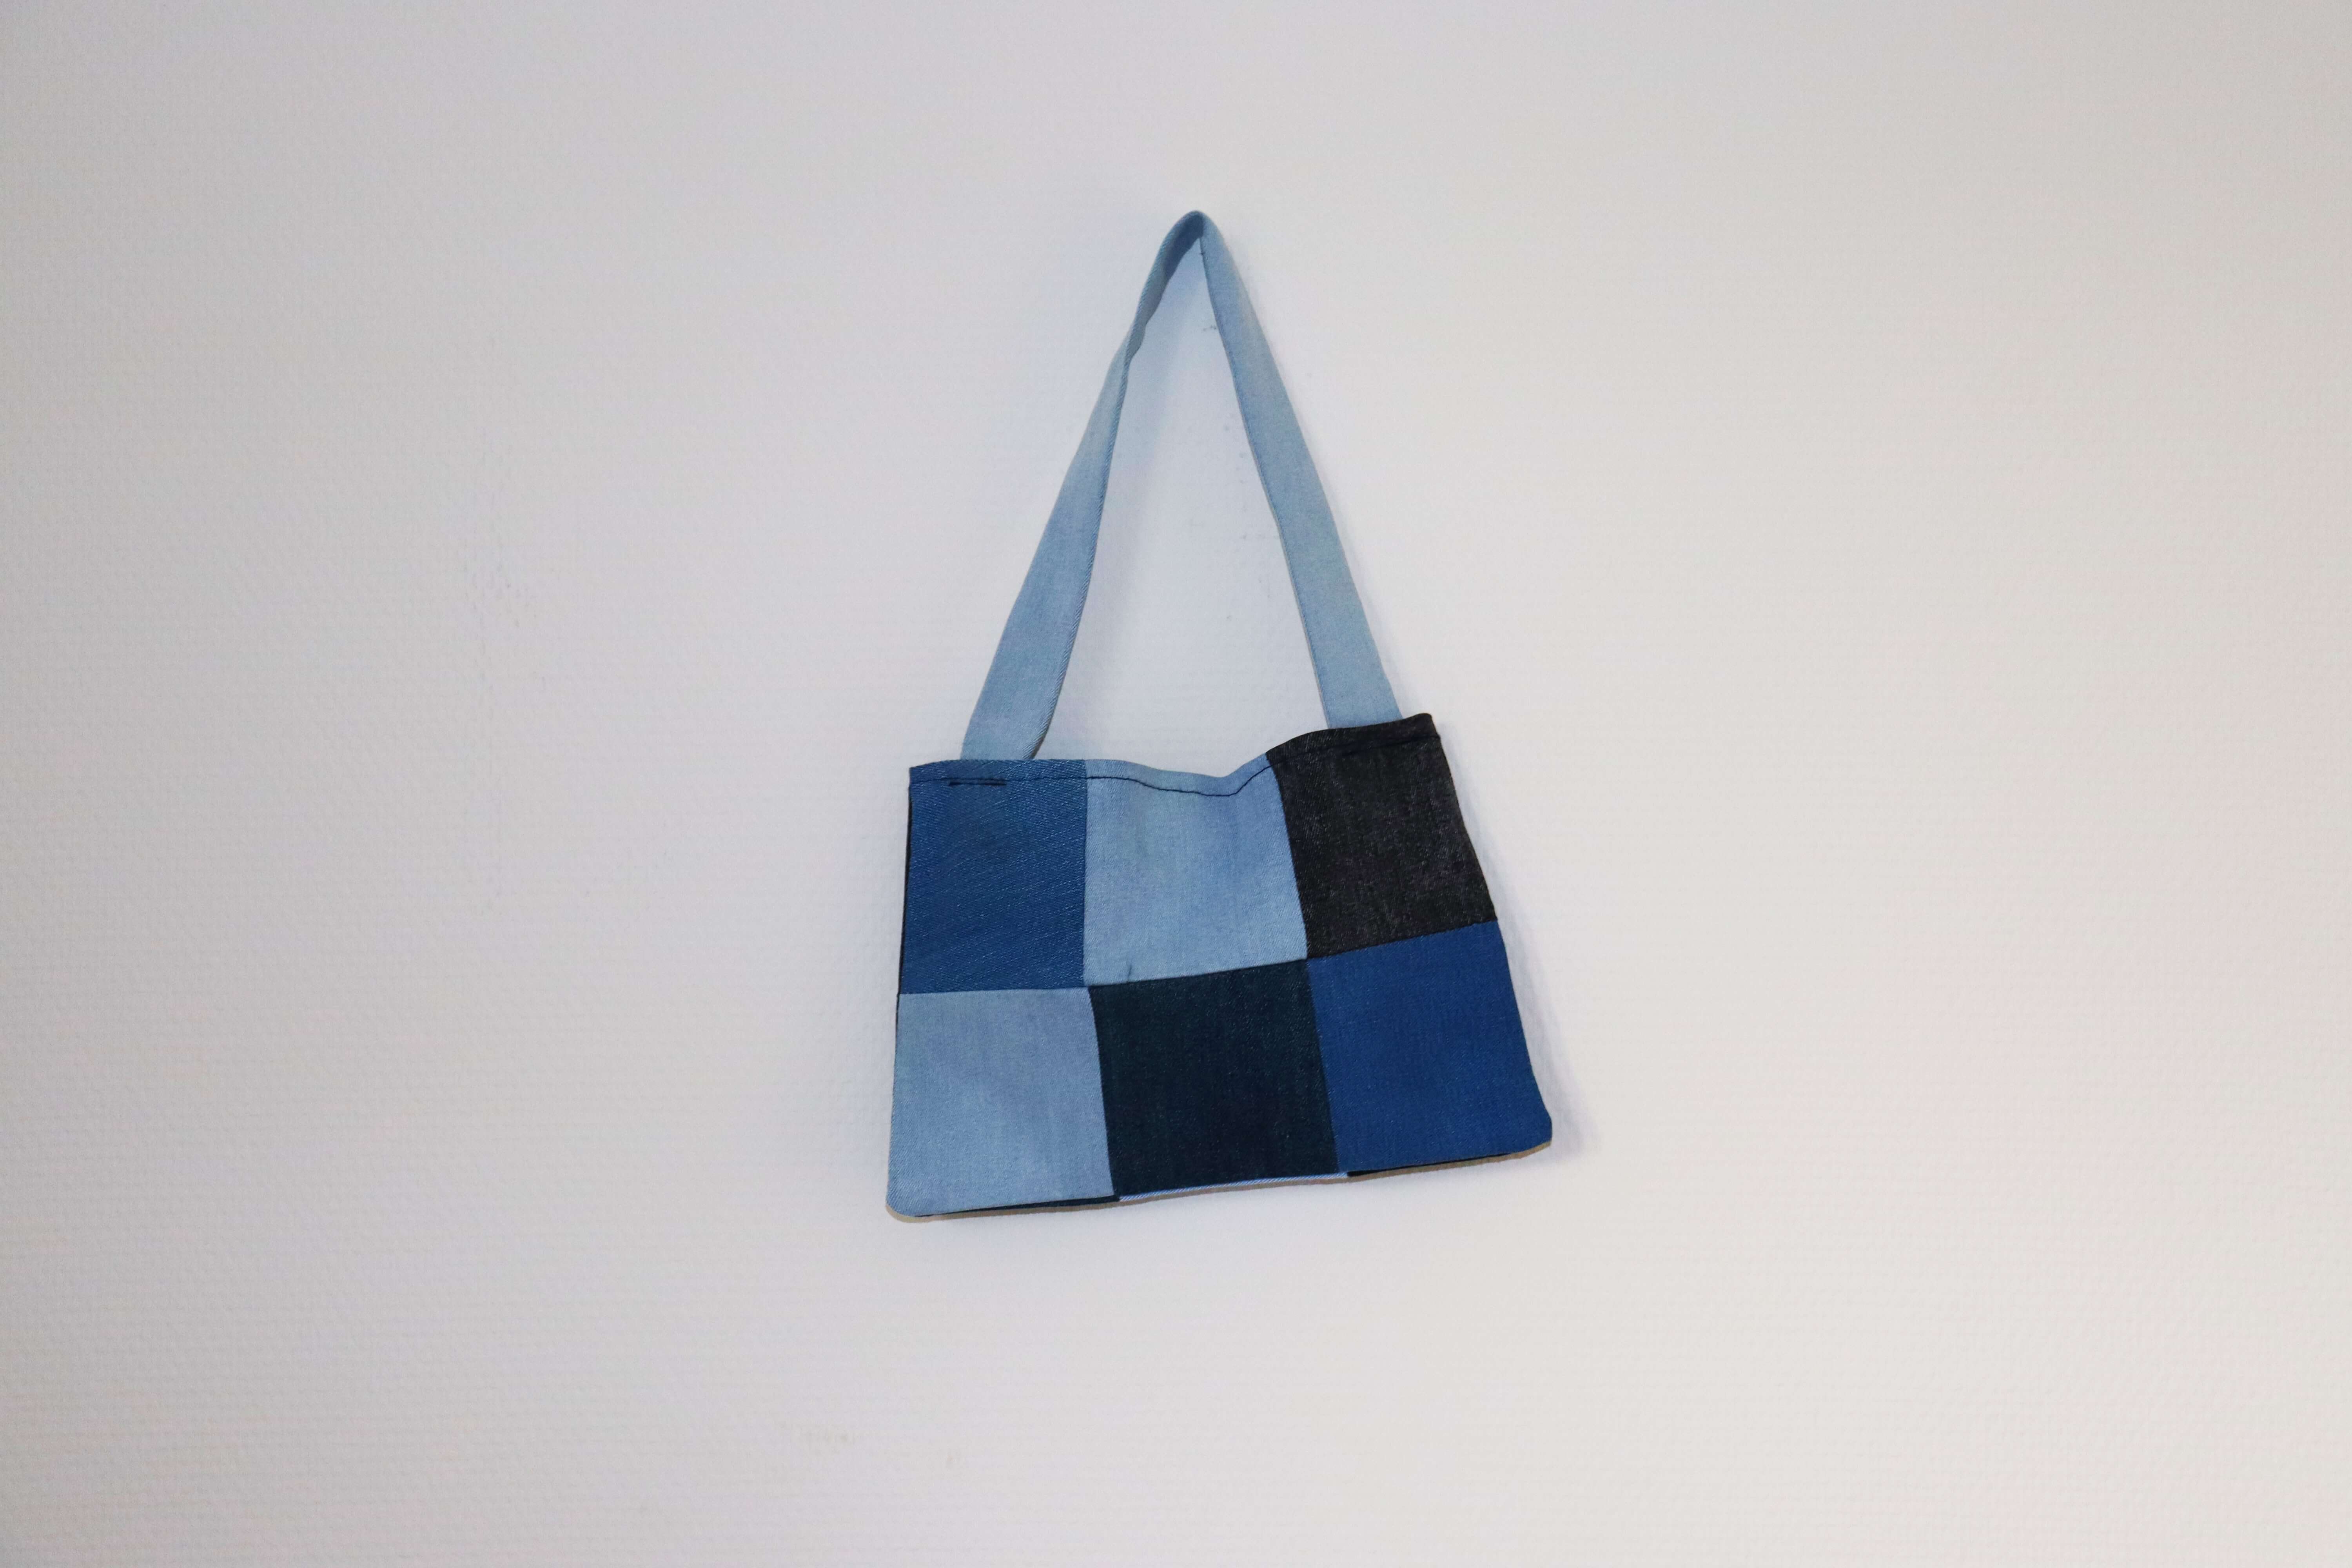 A tote bag made of fabric squares in different shades of blue